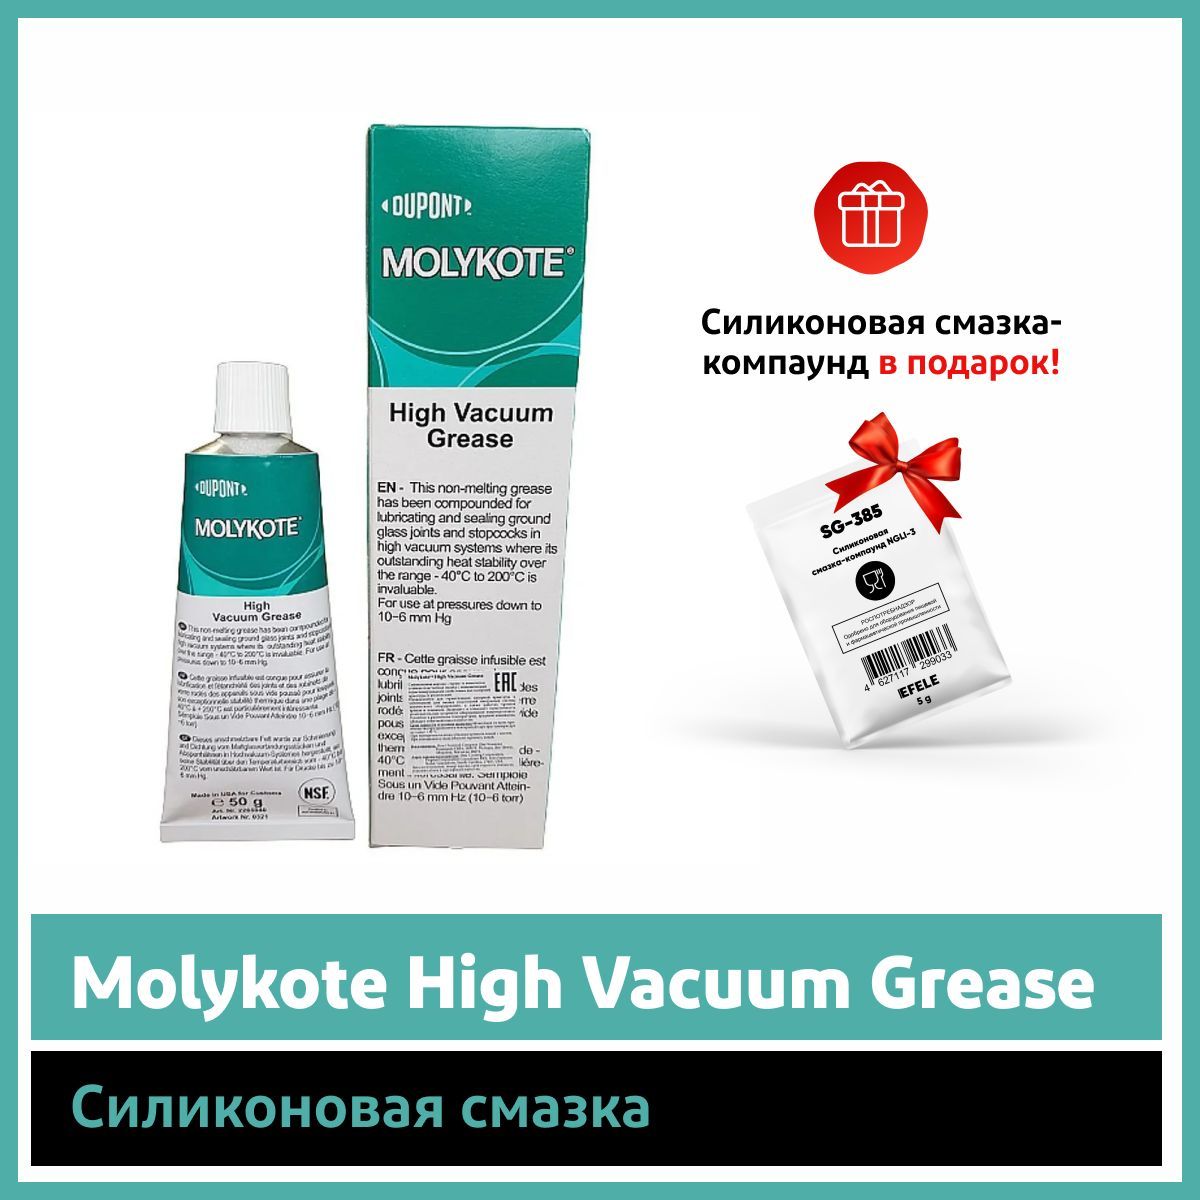 High vacuum grease. Molykote 1102 (50 г.) - смазка.